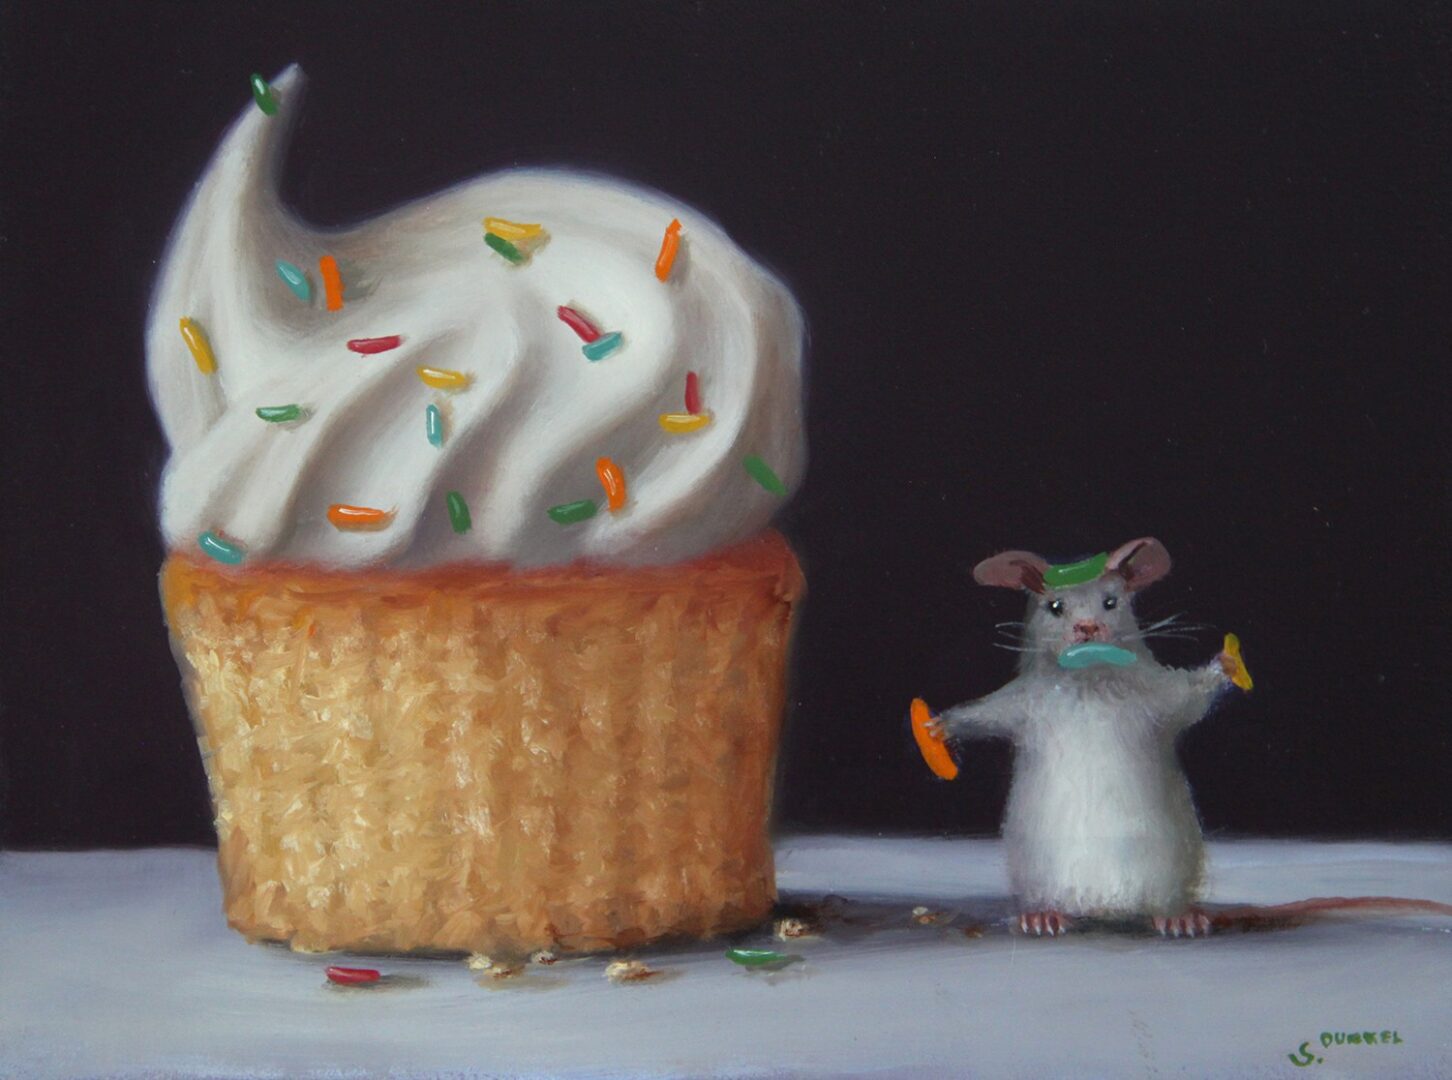 An oil painting of a mouse next to a cupcake.